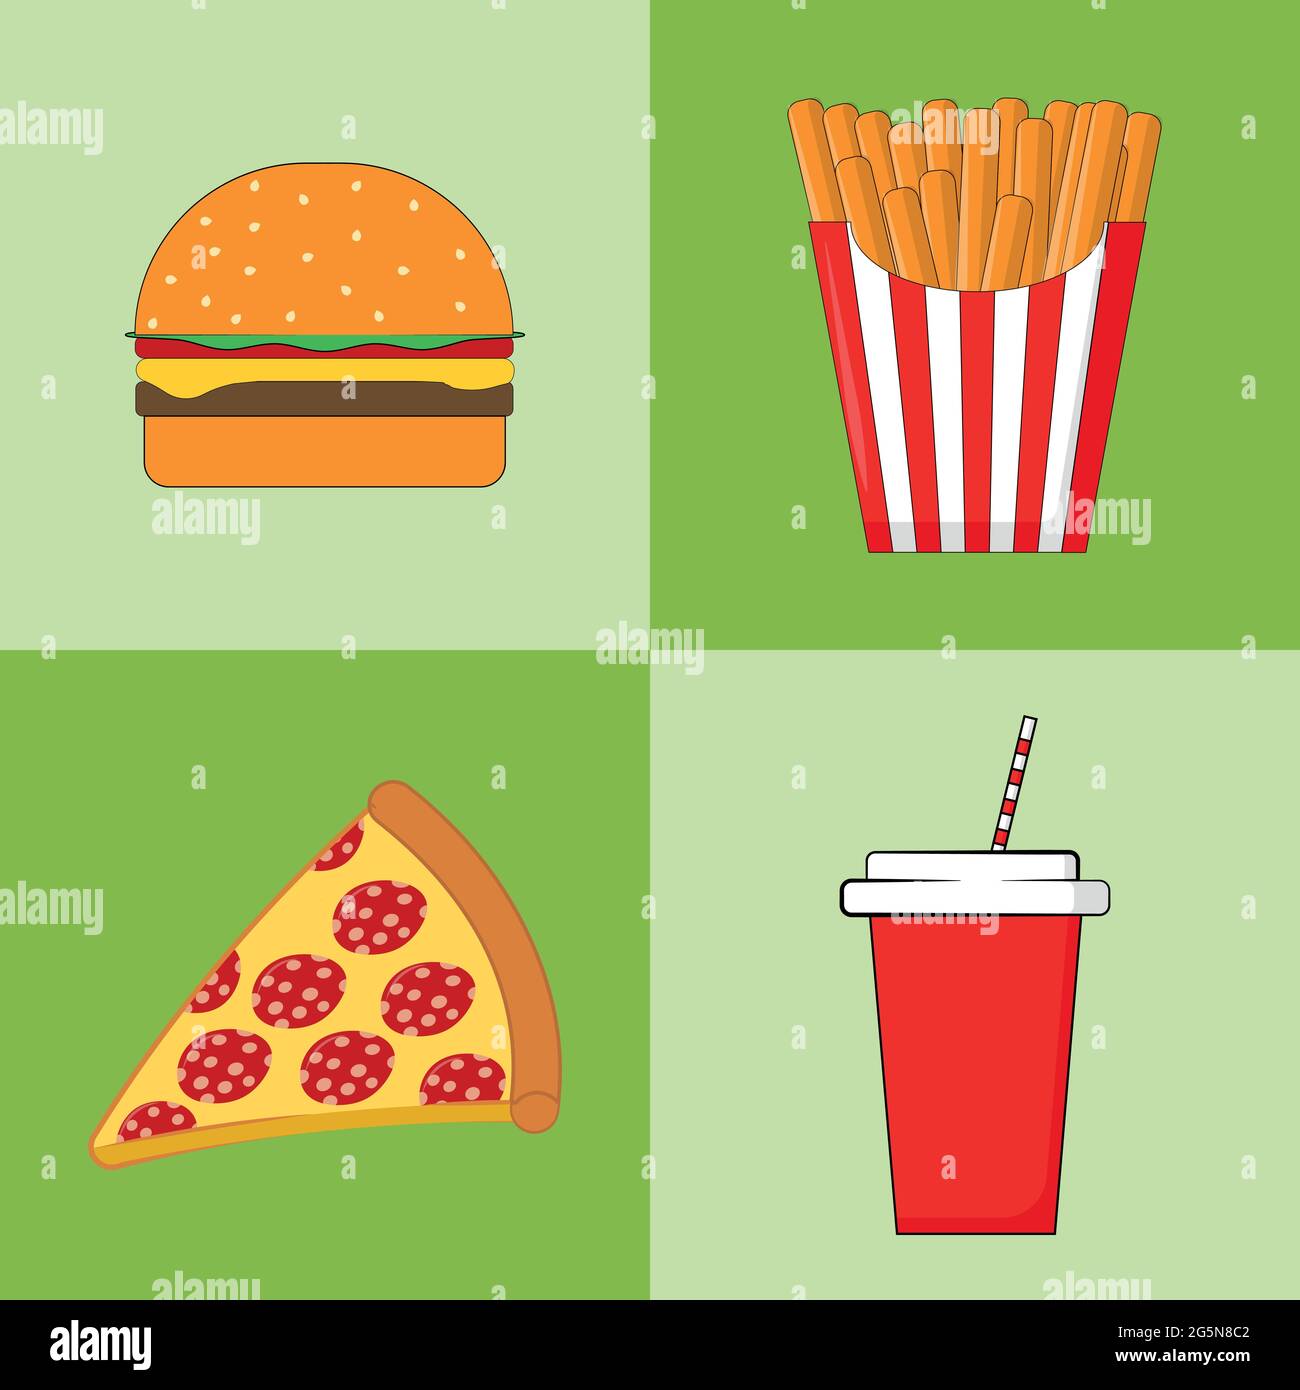 https://c8.alamy.com/comp/2G5N8C2/vector-fresh-burger-with-salad-cutlet-tomato-cheese-sesame-bun-french-fries-pizza-margarita-and-disposable-red-cup-with-hook-and-straw-on-plain-2G5N8C2.jpg